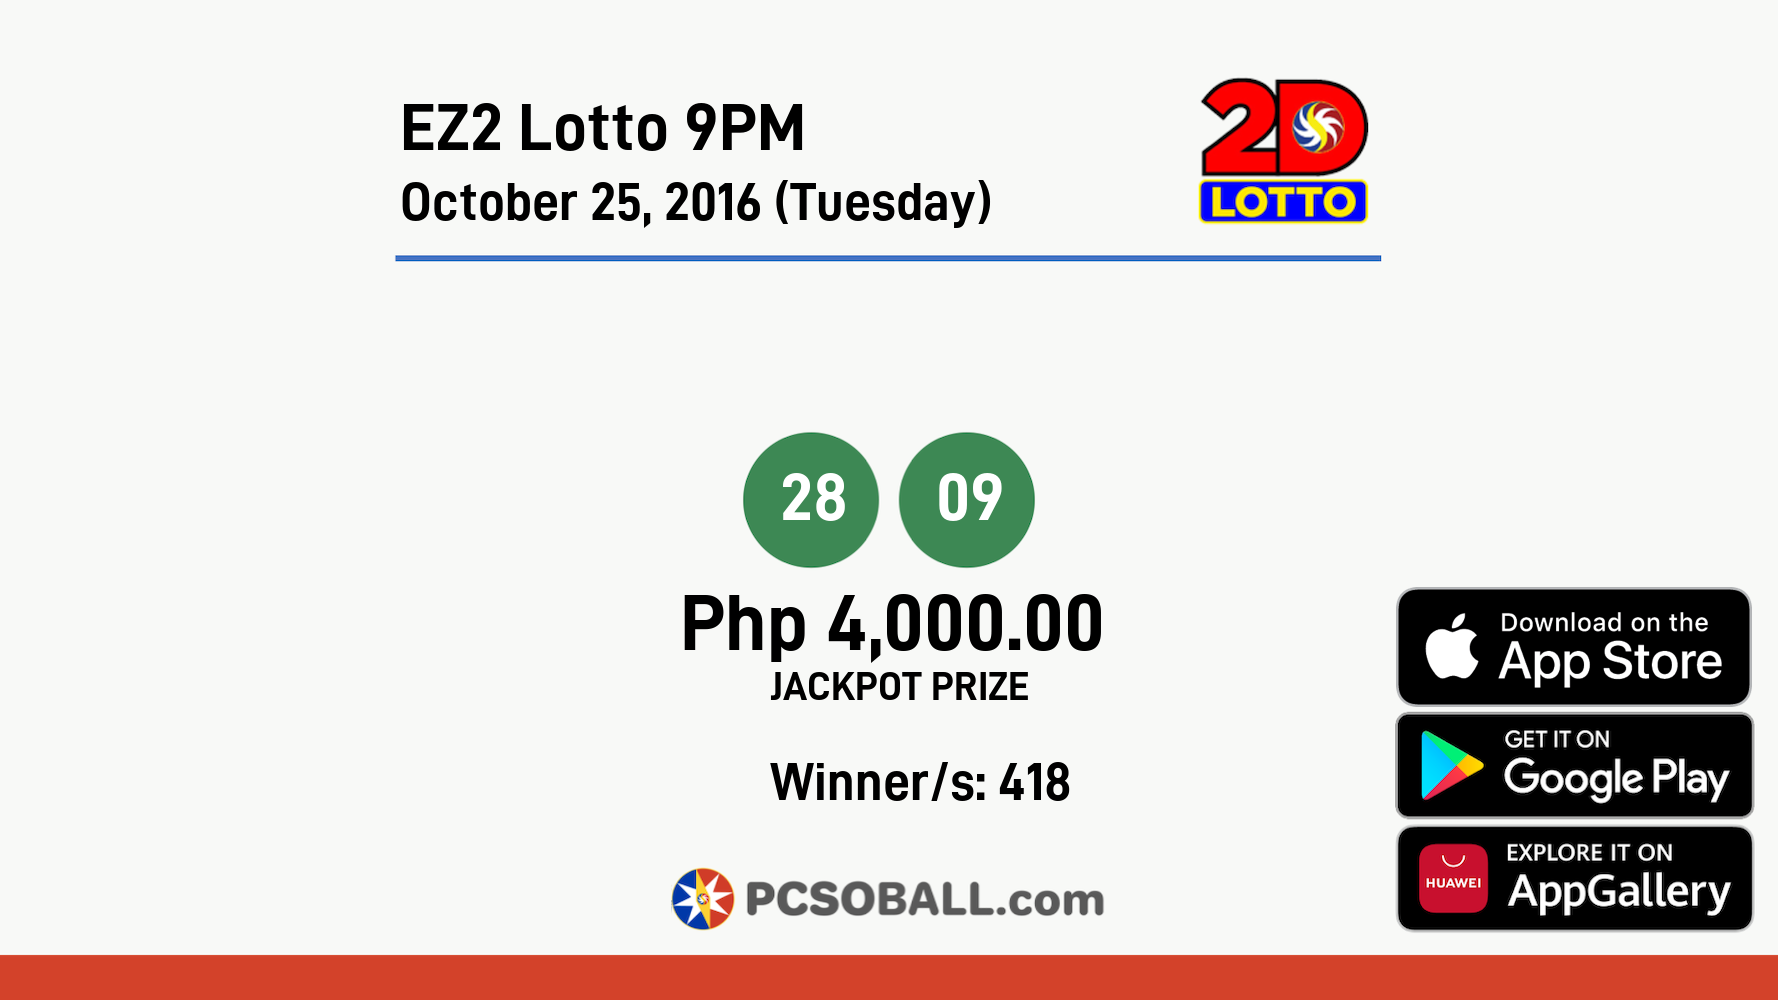 EZ2 Lotto 9PM October 25, 2016 (Tuesday) Result